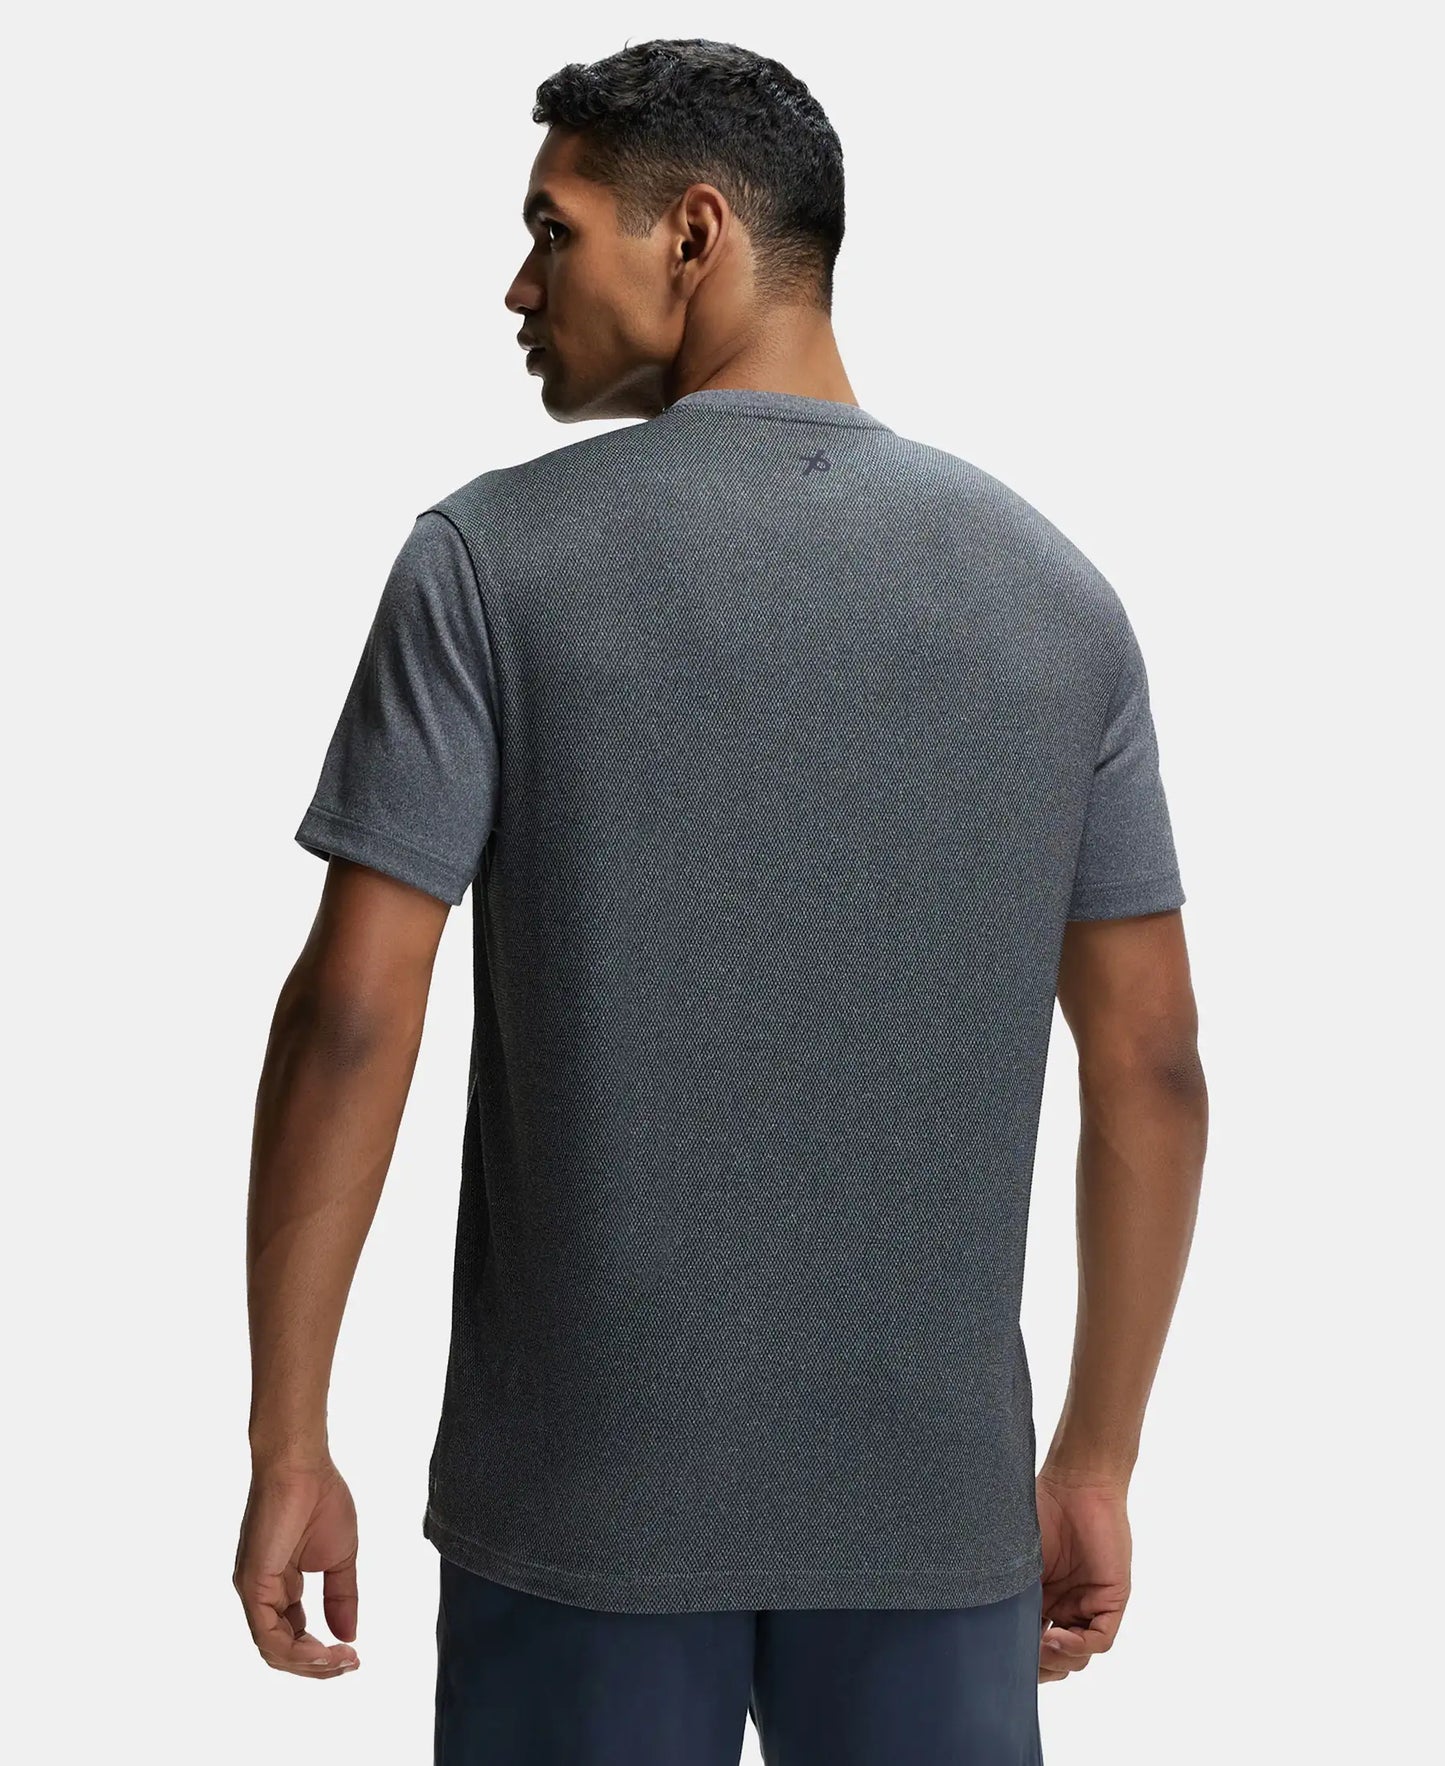 Recycled Microfiber Elastane Stretch Half Sleeve Round Neck T-Shirt with Breathable Mesh - Black-3